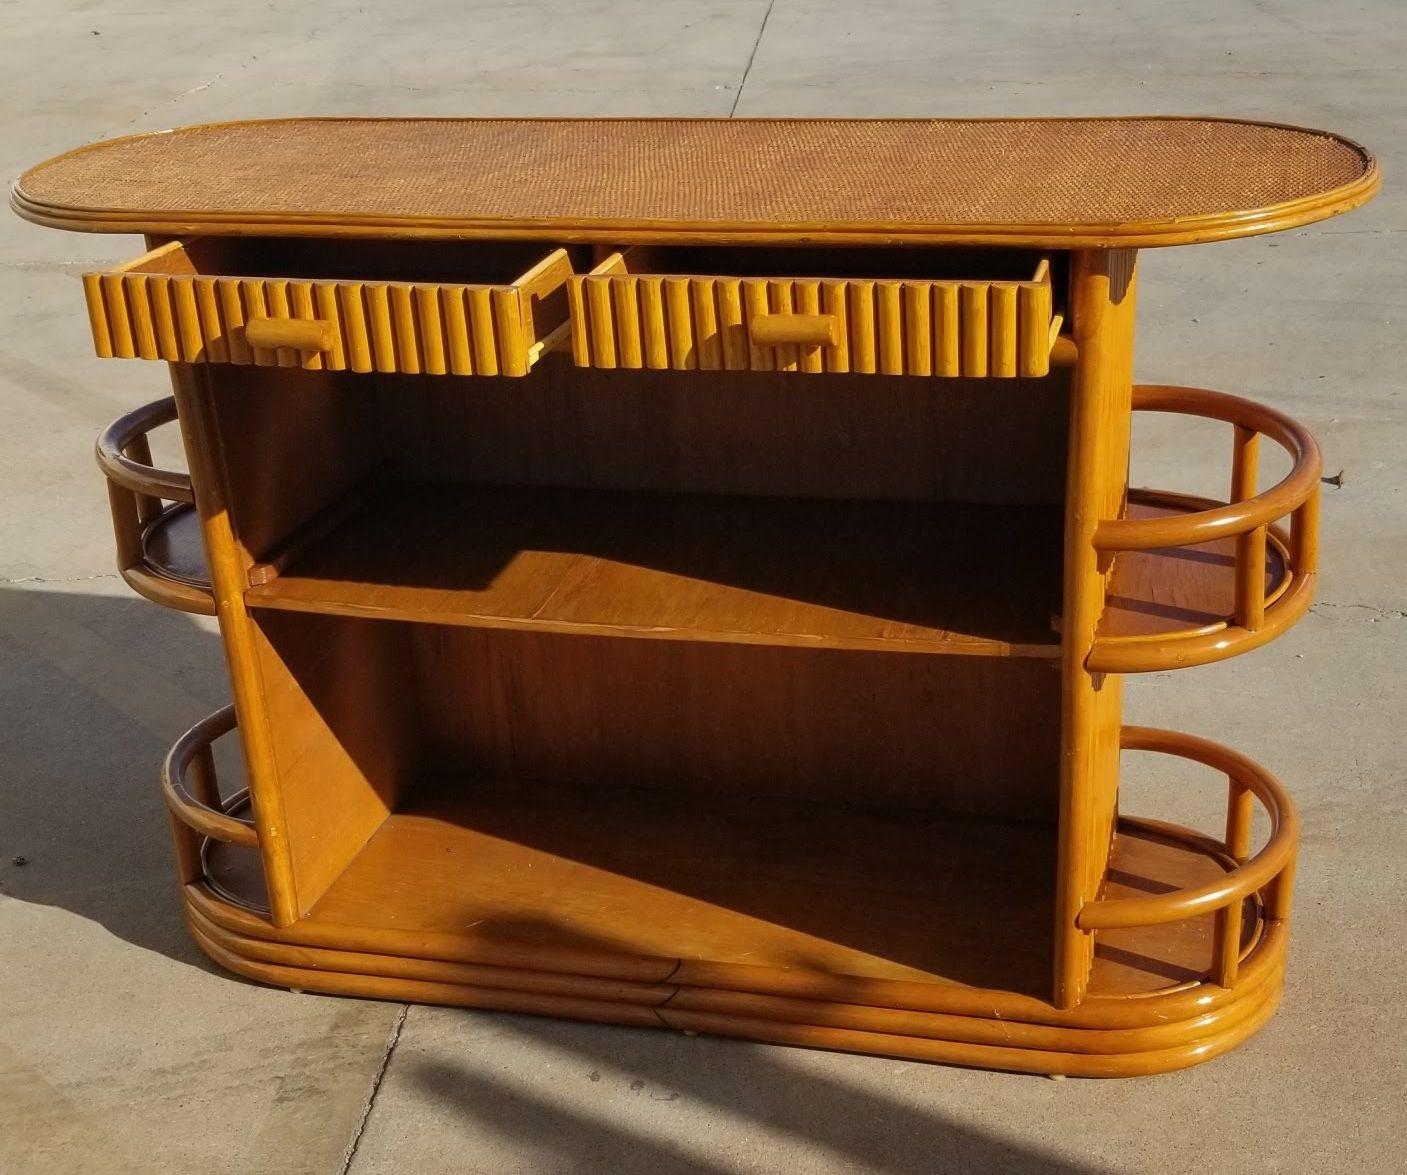 Restored Rattan Dry Bar Featuring Side Shelves and Mat Top In Excellent Condition For Sale In Van Nuys, CA